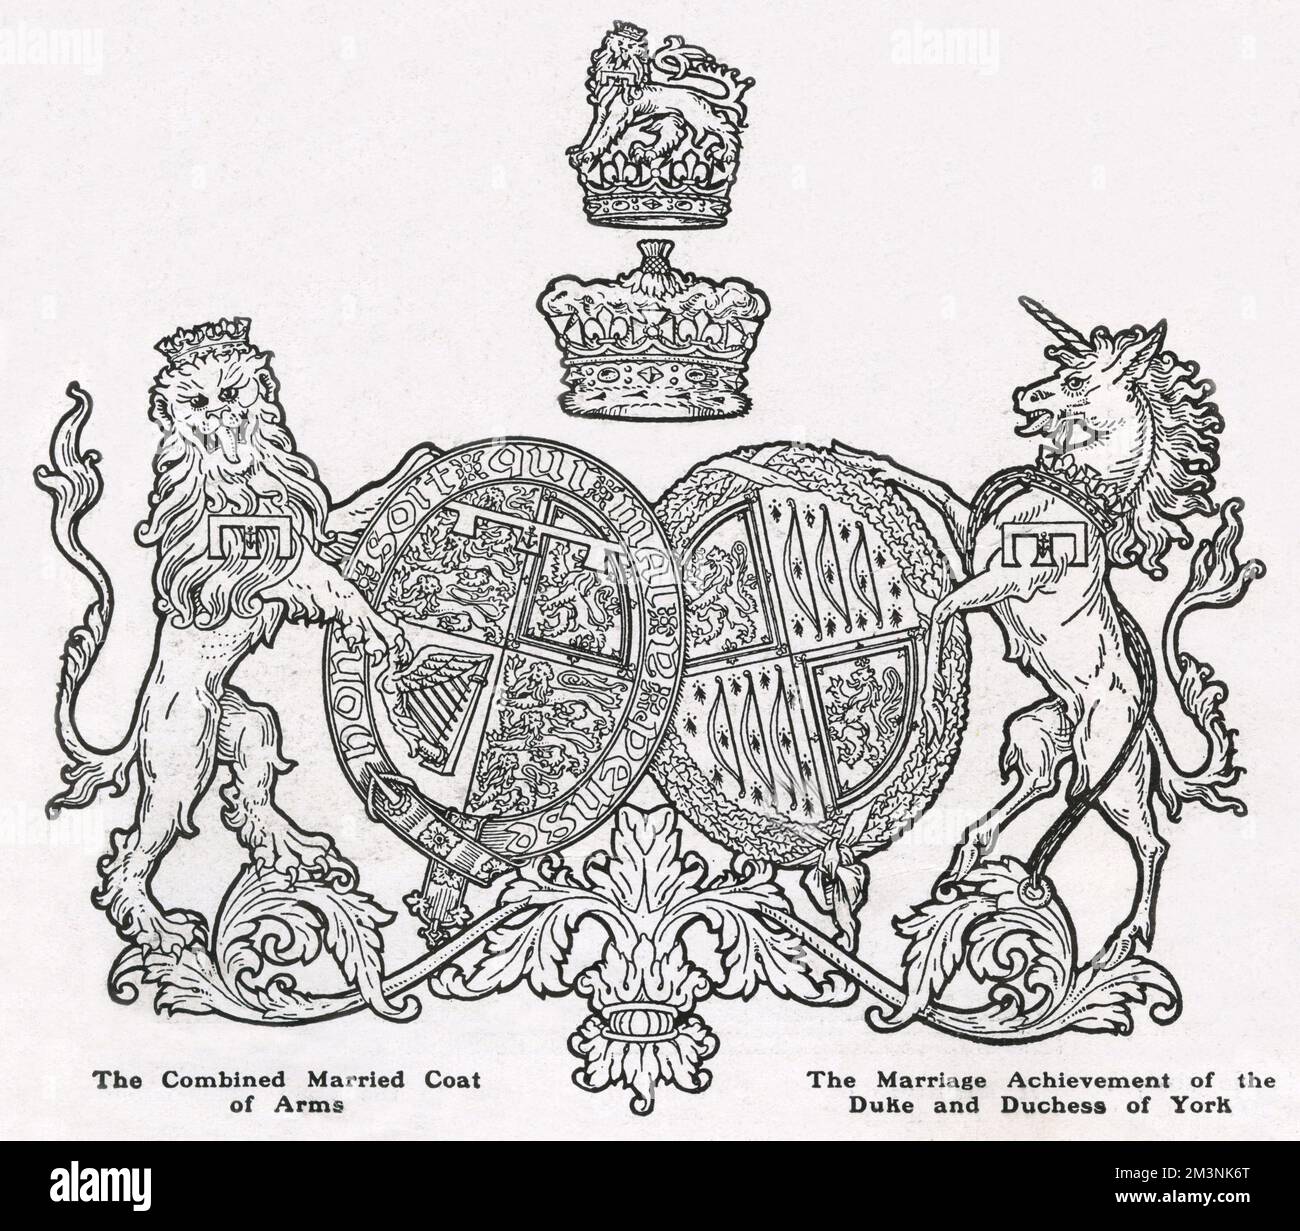 The combined married coat of arms of the Duke and Duchess of York, showing the conjoined arms of the Windsor and Strathmore families.  On the dexter side we see the Duke's arms encircled by a wreath of oak leaves to make the design balance.  Above the two shields is the Duke's coronet, surmounted by his royal crest.  The two shields are enclosed by his supporters, the lion and the unicorn.       Date: 1923 Stock Photo